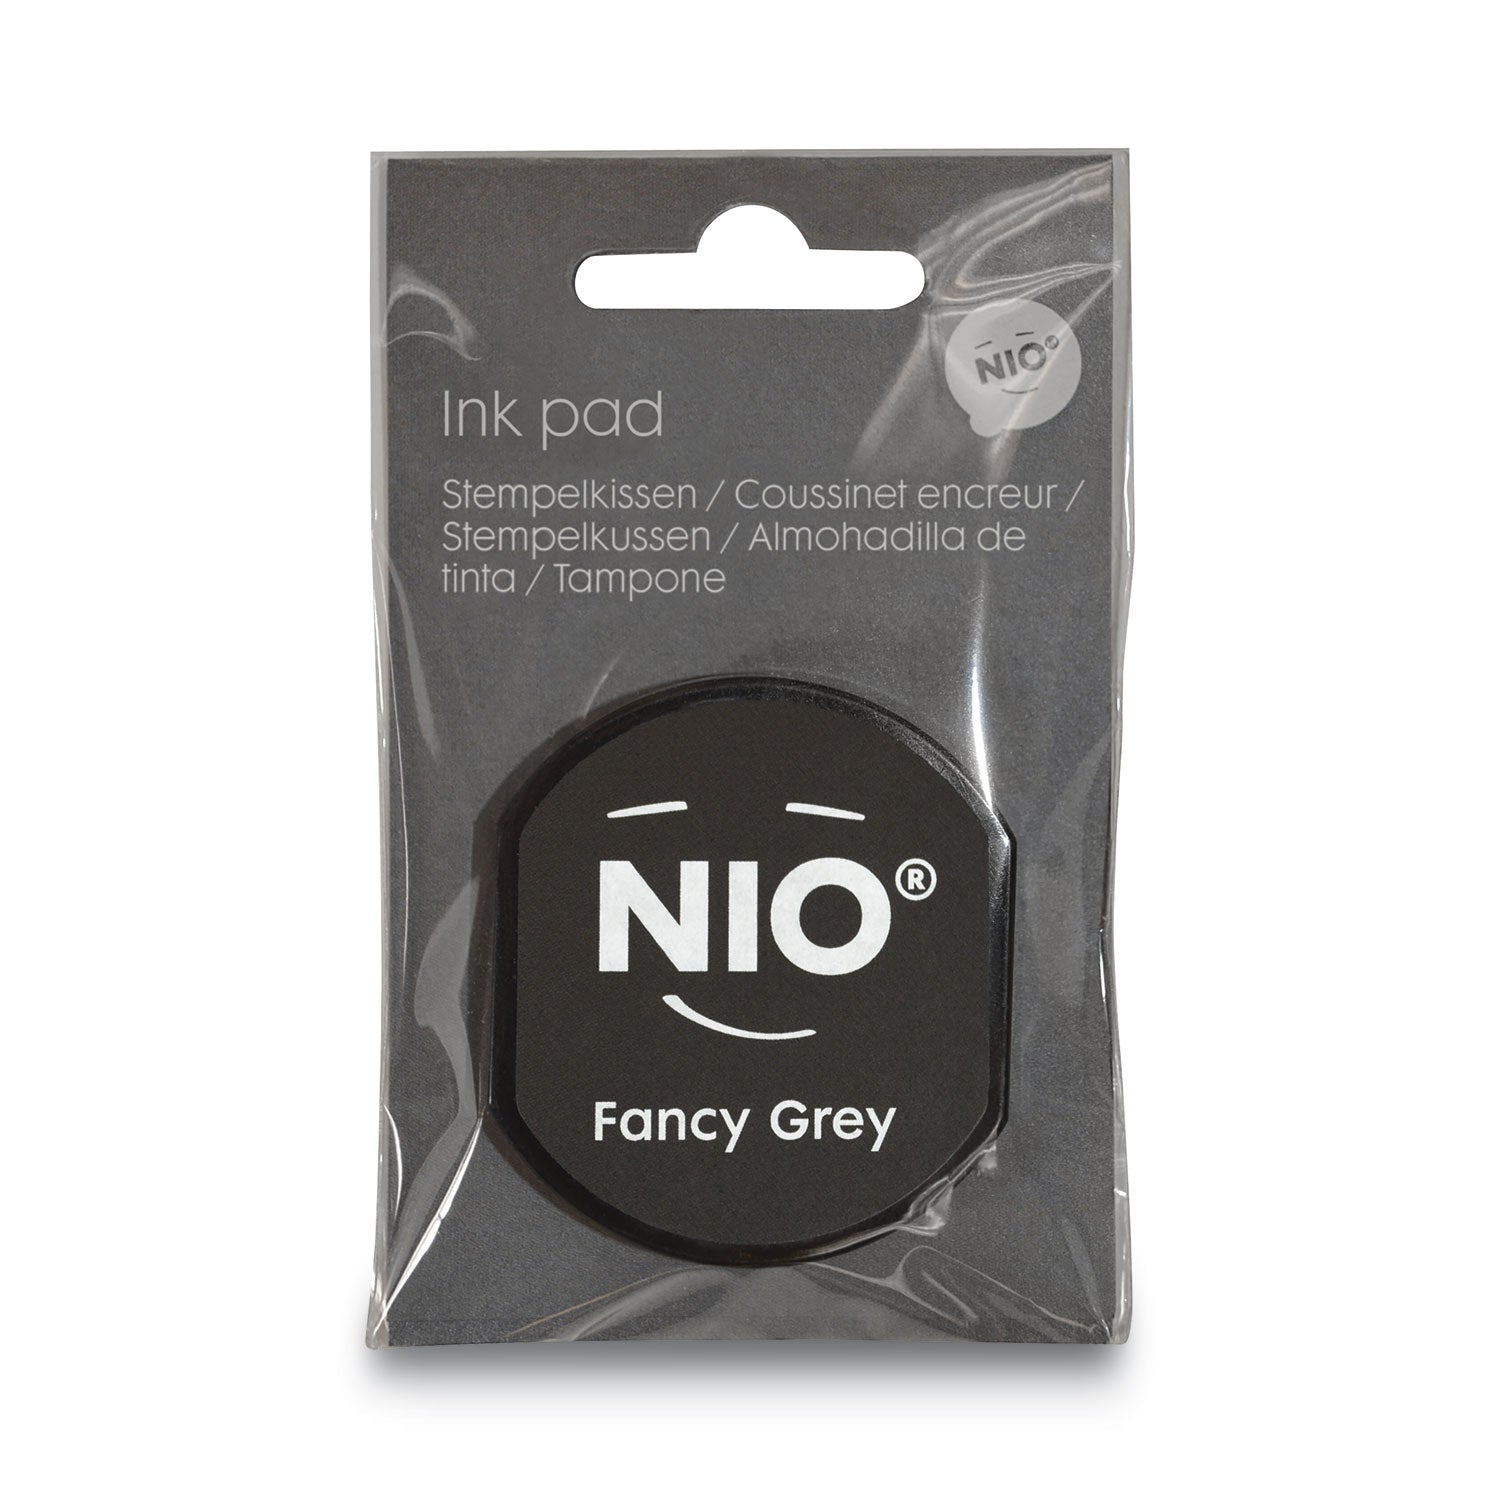 ink-pad-for-nio-stamp-with-voucher-275-x-275-fancy-gray_cos071519 - 2